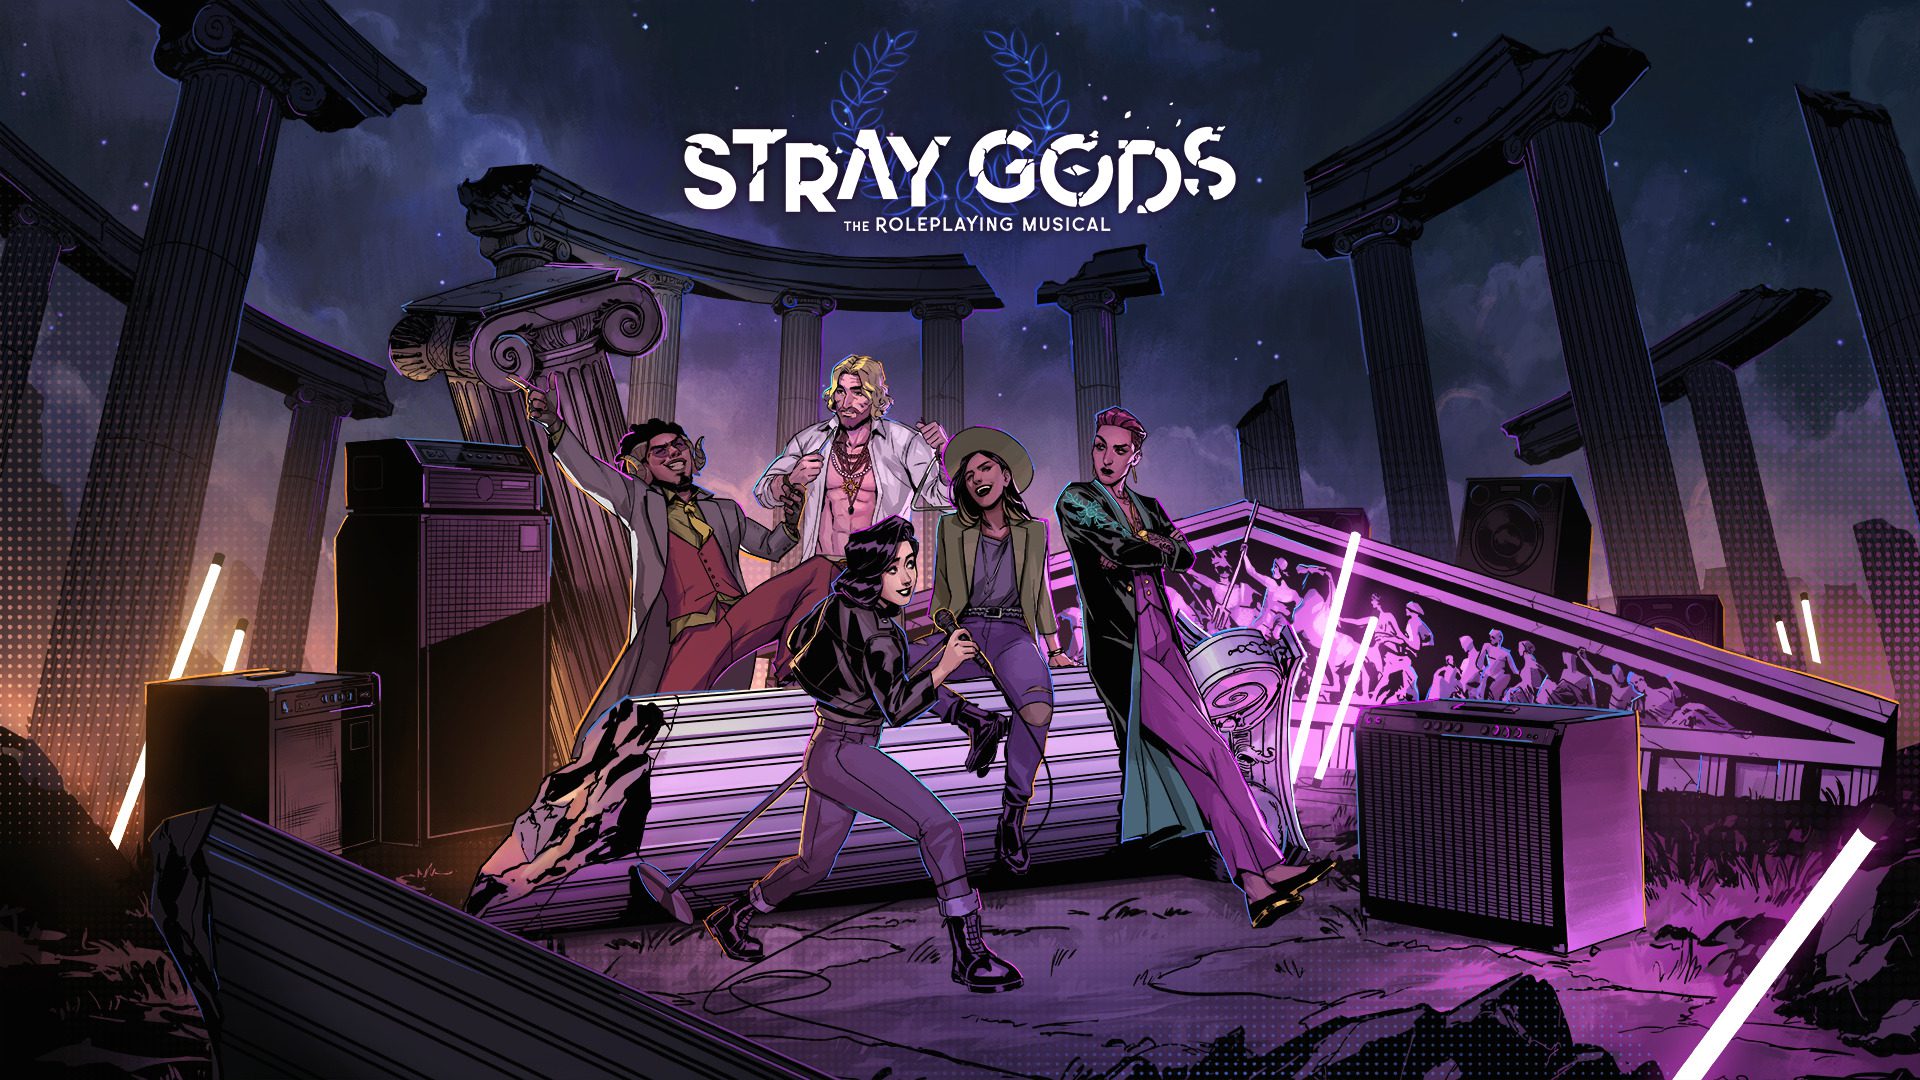 Stray Gods Hd Wallpaper Download Now